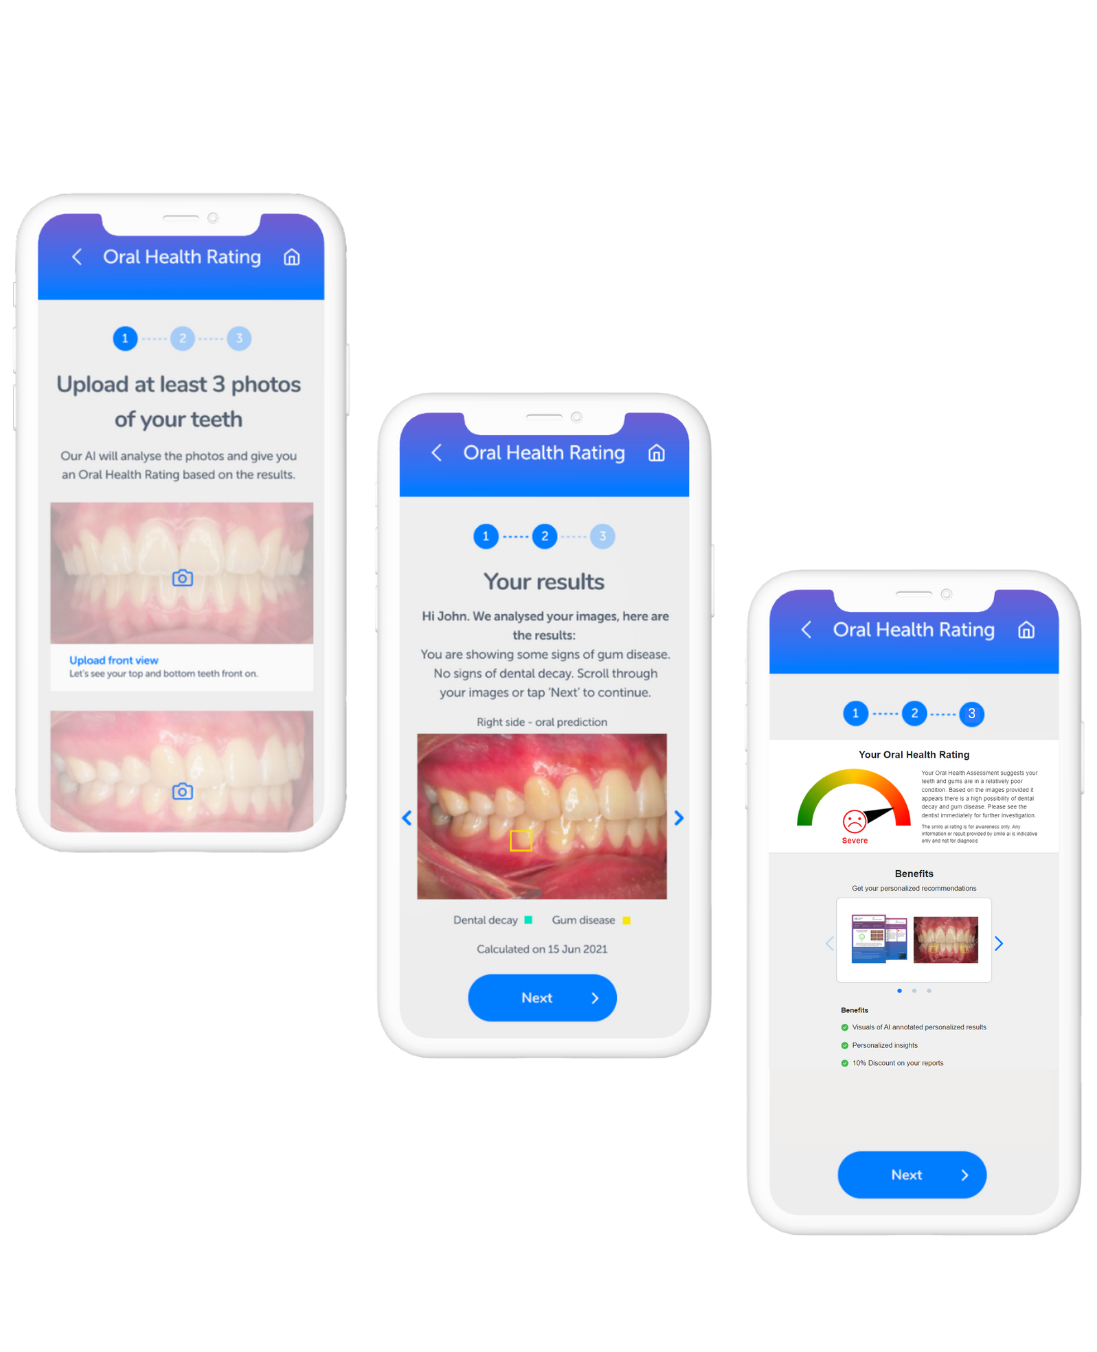 Get your instant dental check in just a few clicks